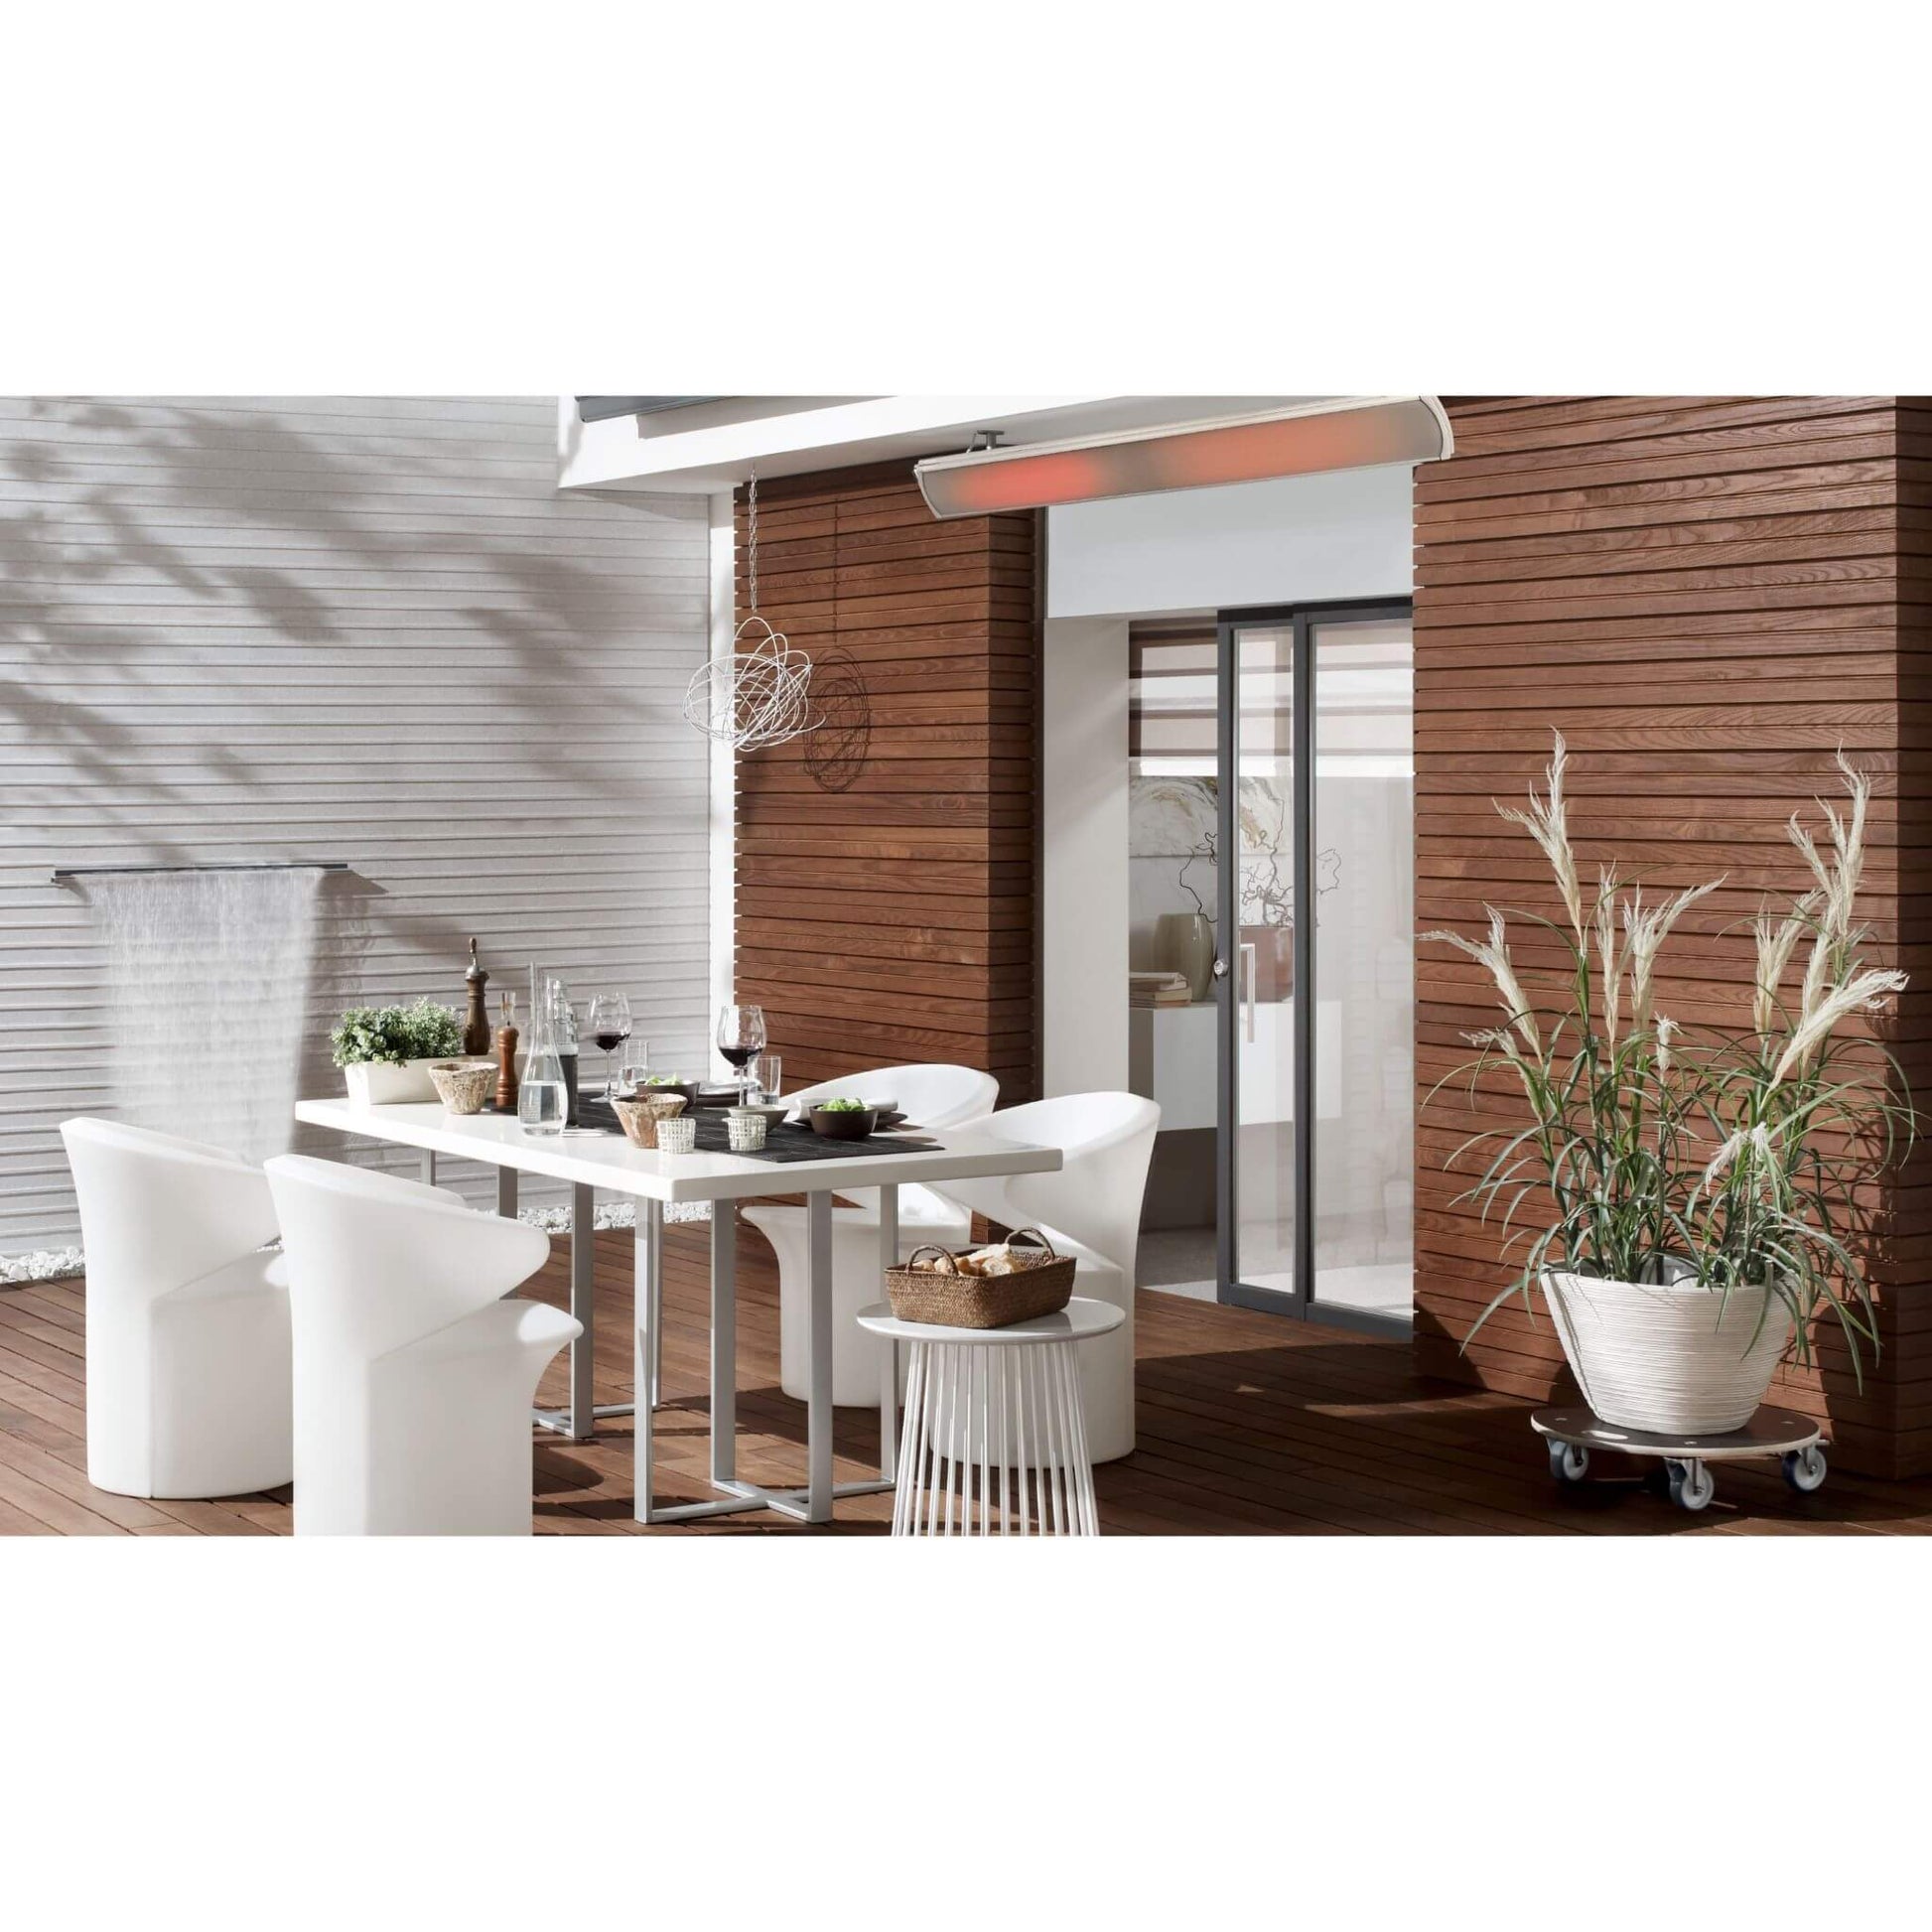 VISION infrared wall-mounted 32kW electric panel heater by Heatscope in white for outdoor terrace heating